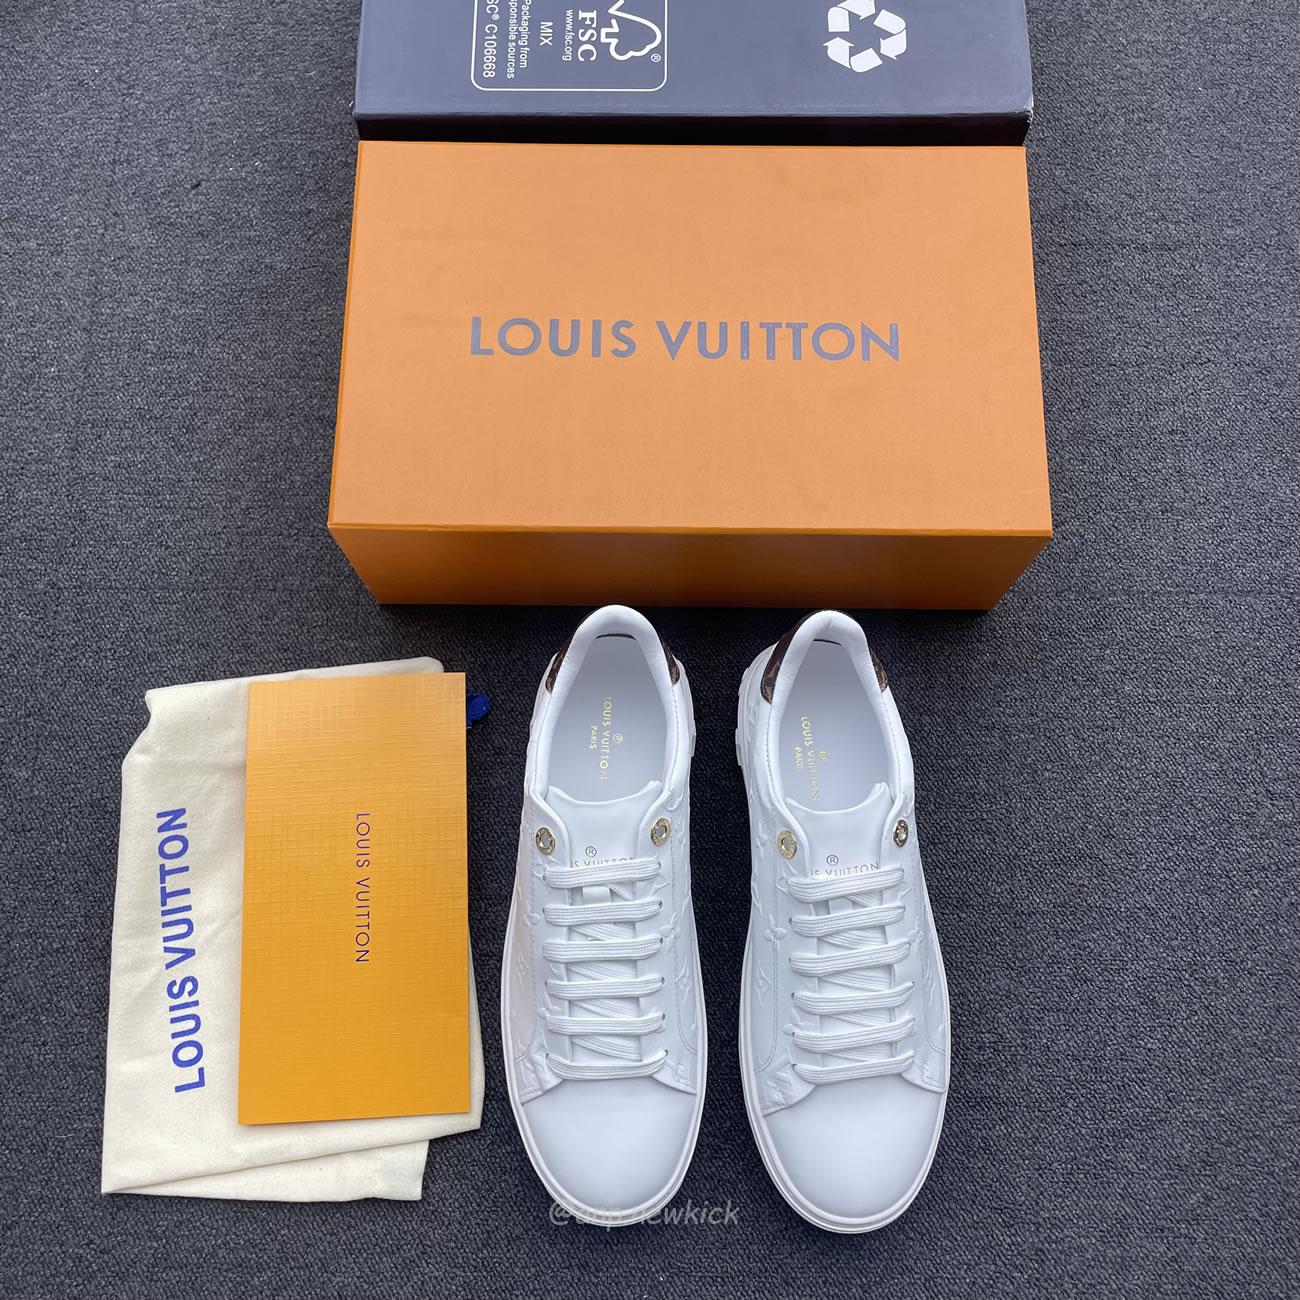 Louis Vuitton Time Out Debossed Monogram Leather White (5) - newkick.org